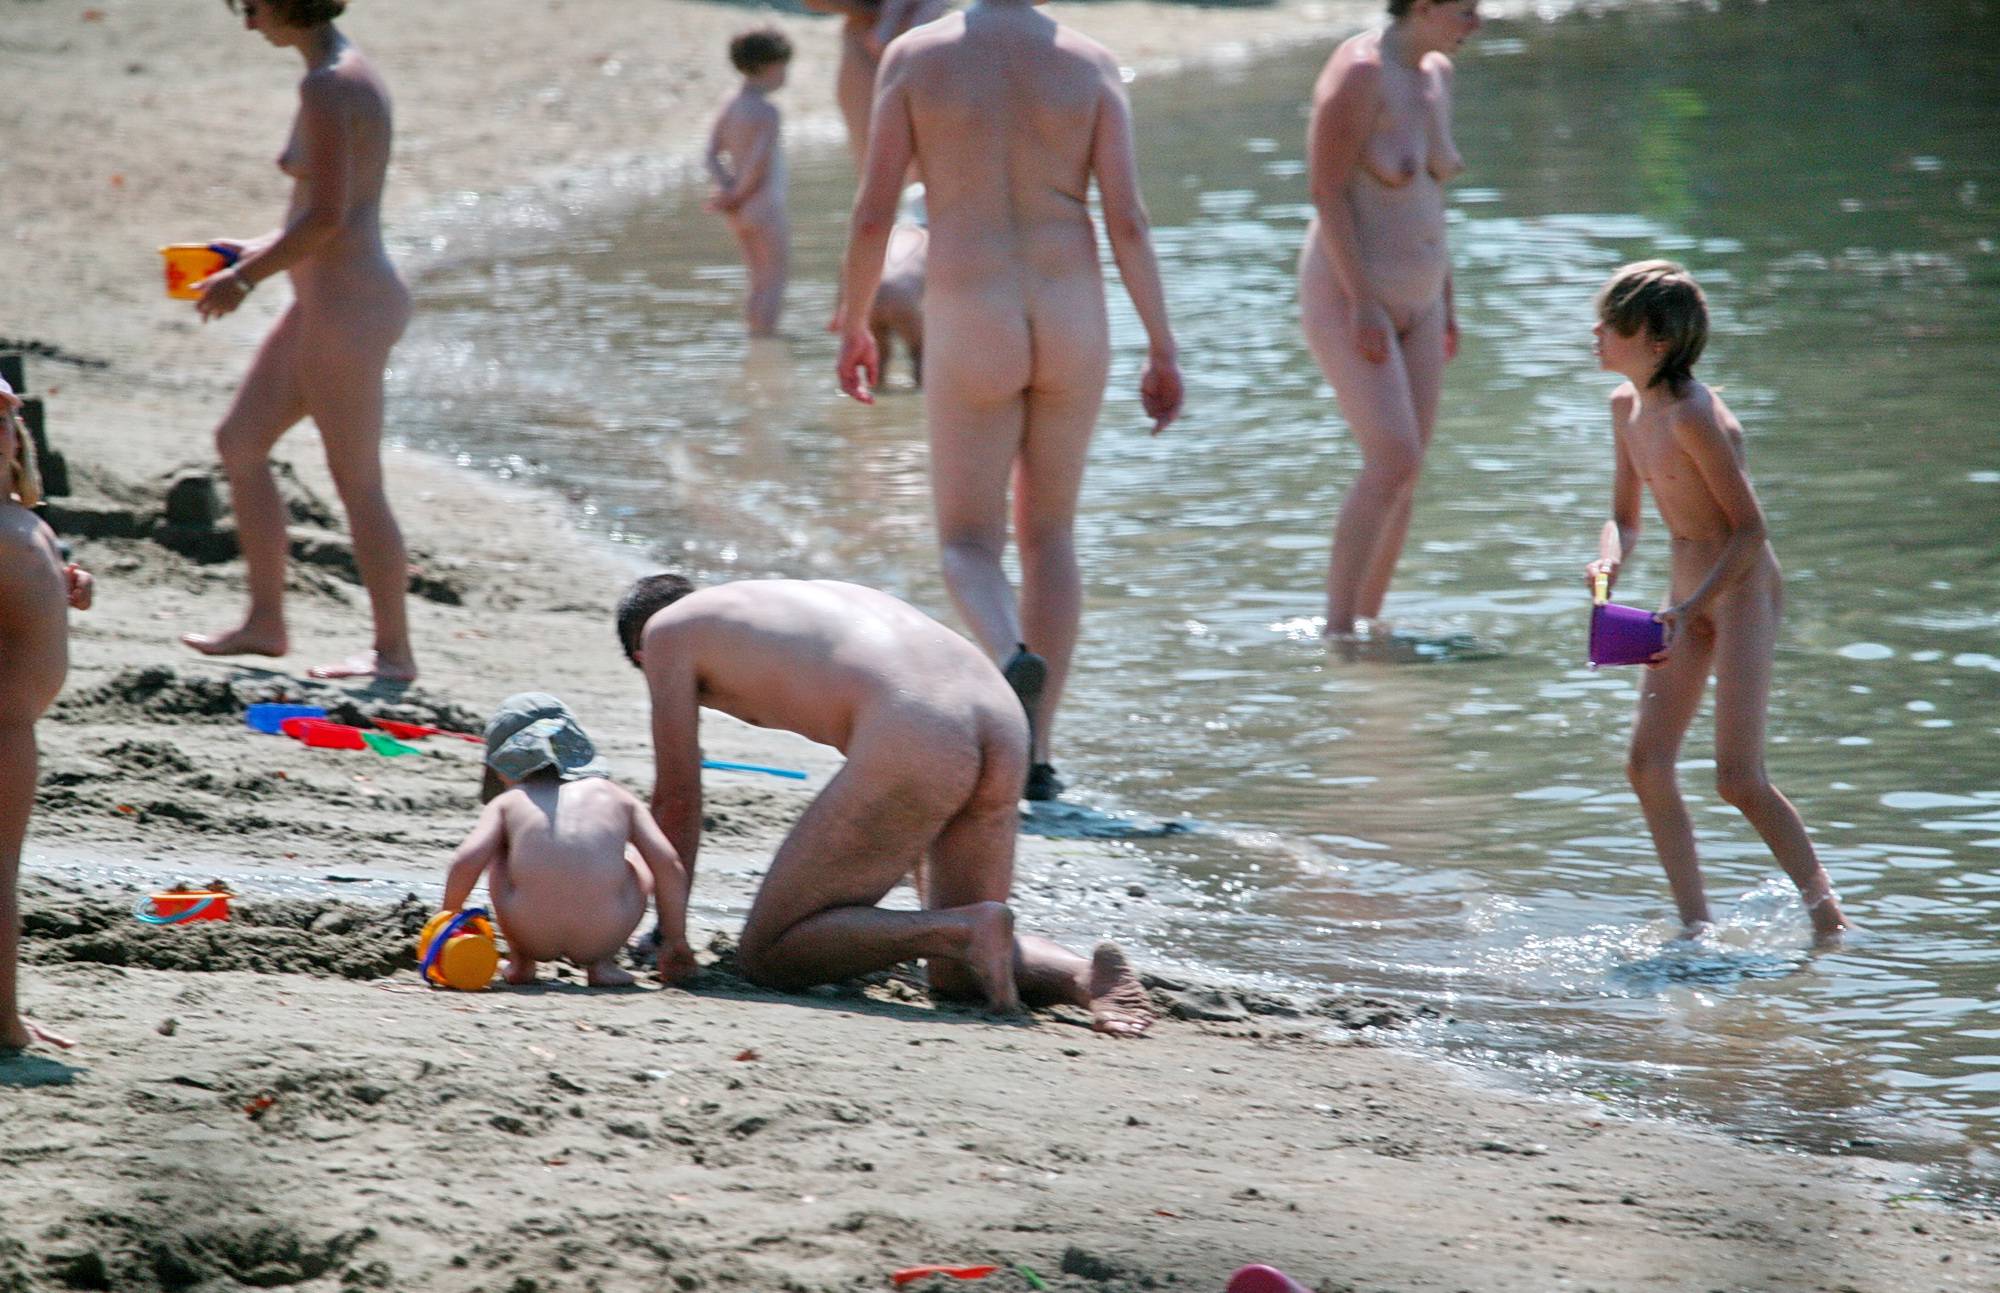 Pure Nudism Photos-Naturist Shore Relaxation - 1